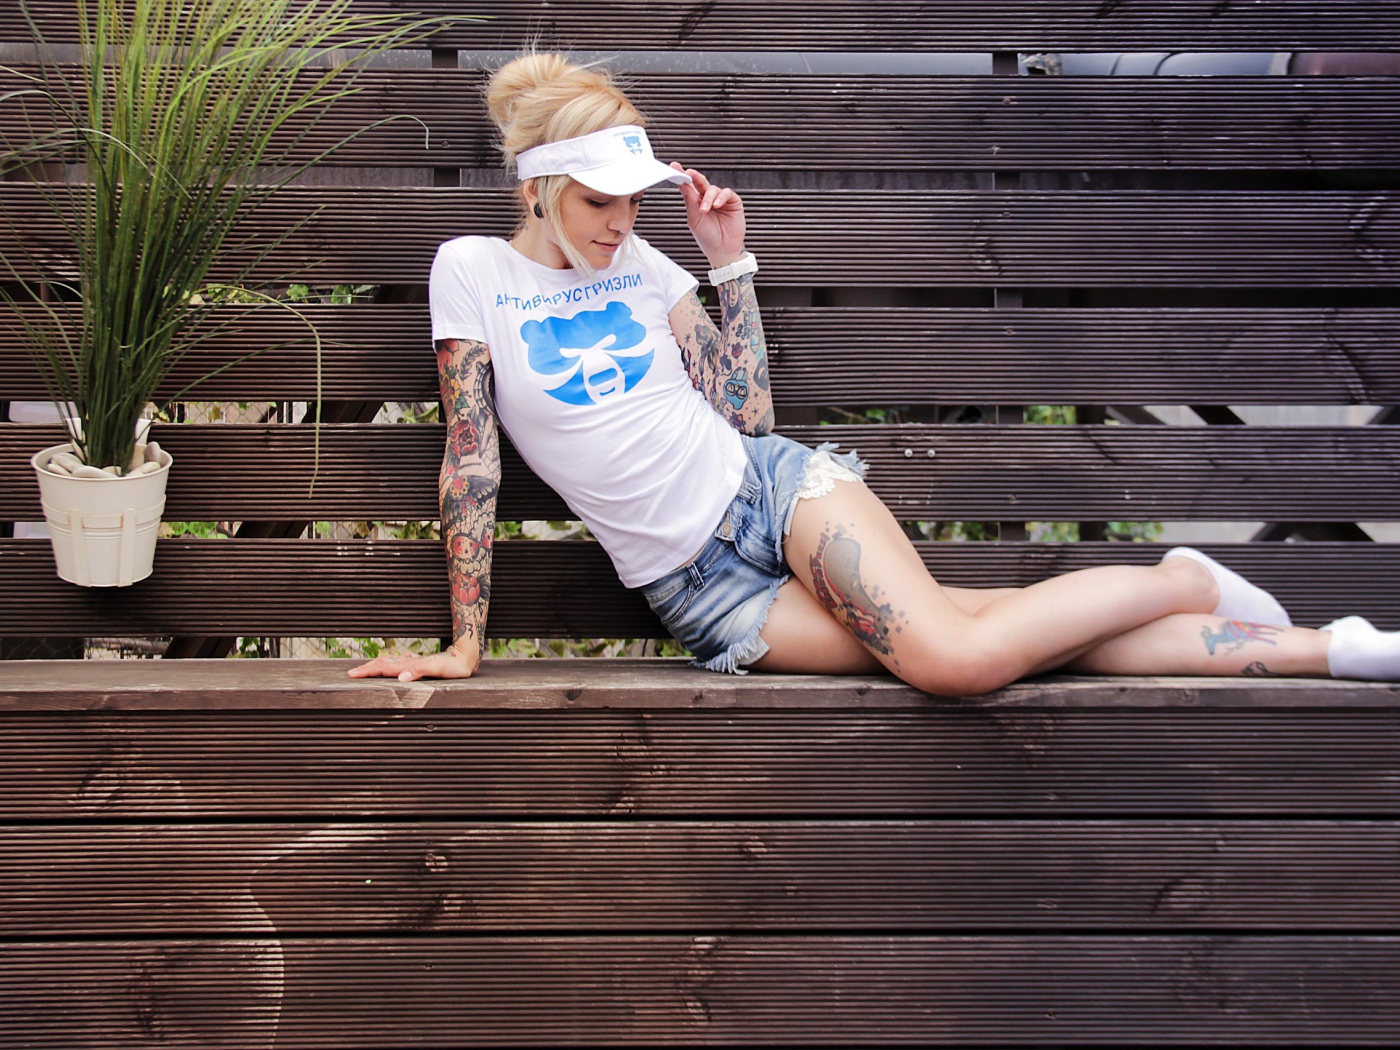 Sports girl in tattoos lies on a wooden bench